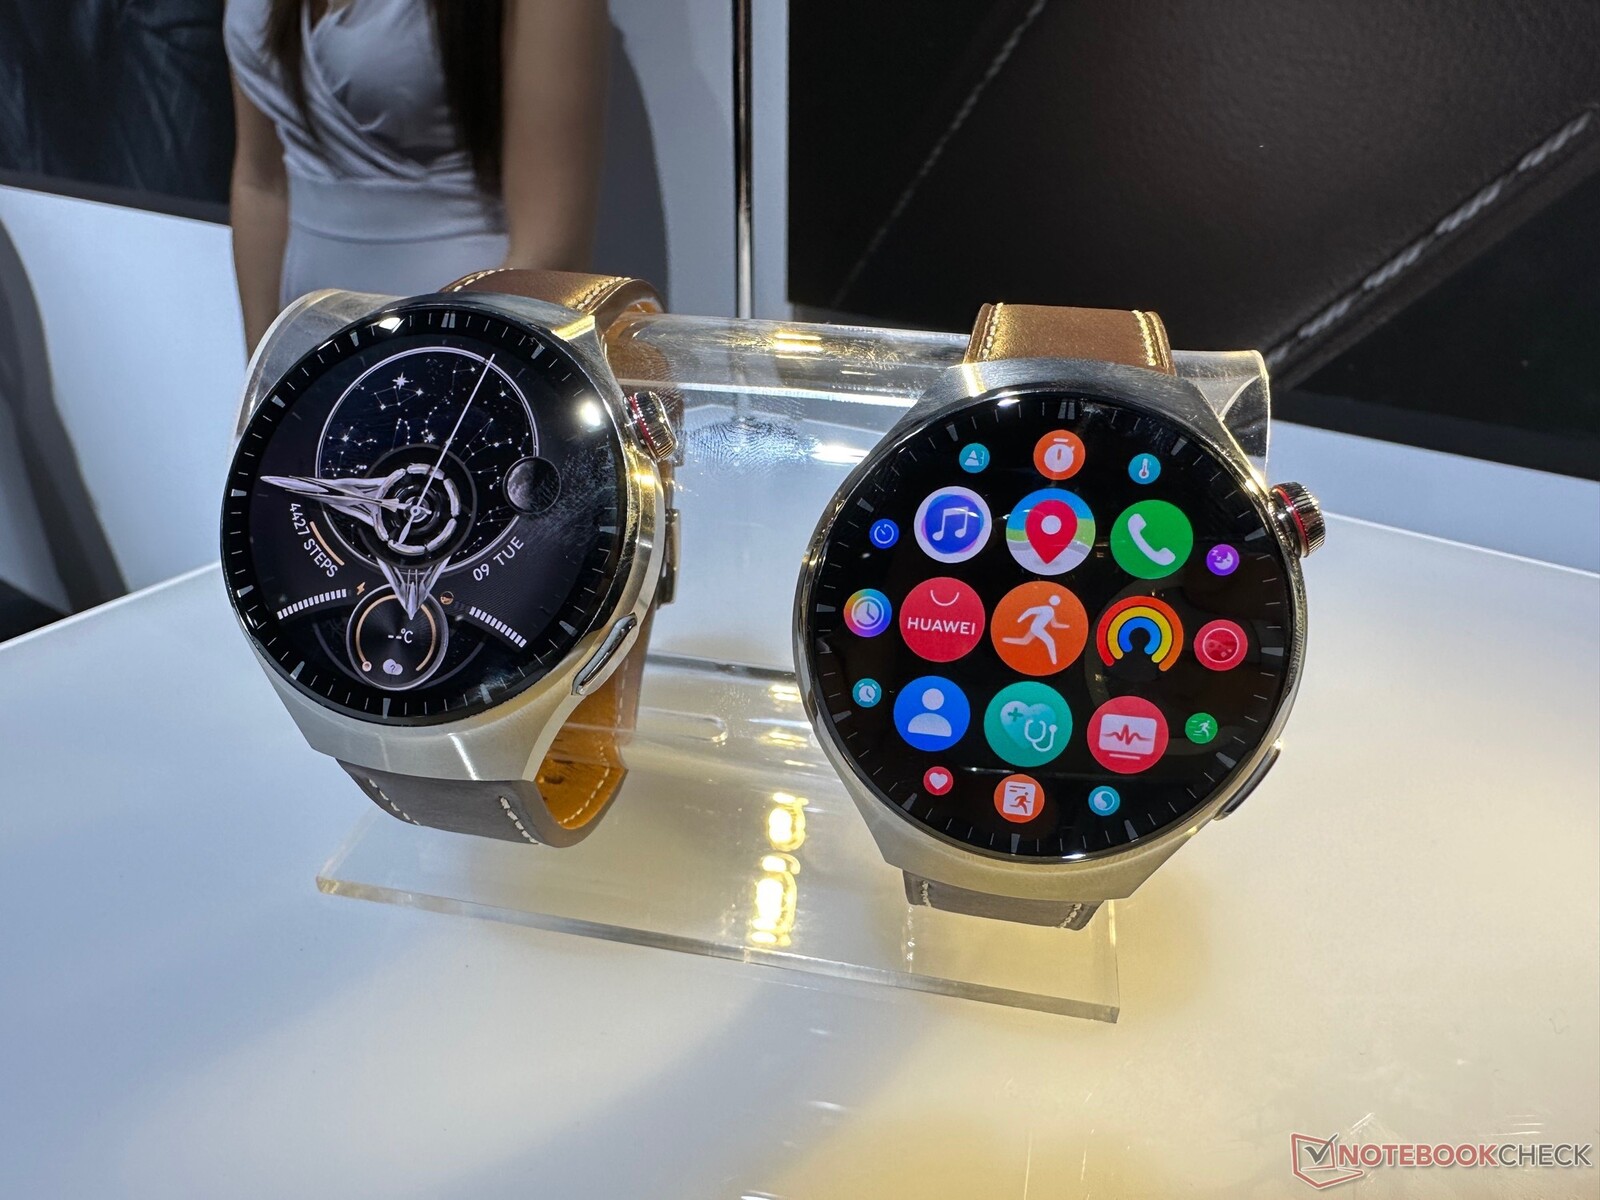 Huawei Watch 4 Pro Leather Version image tour - Huawei Central